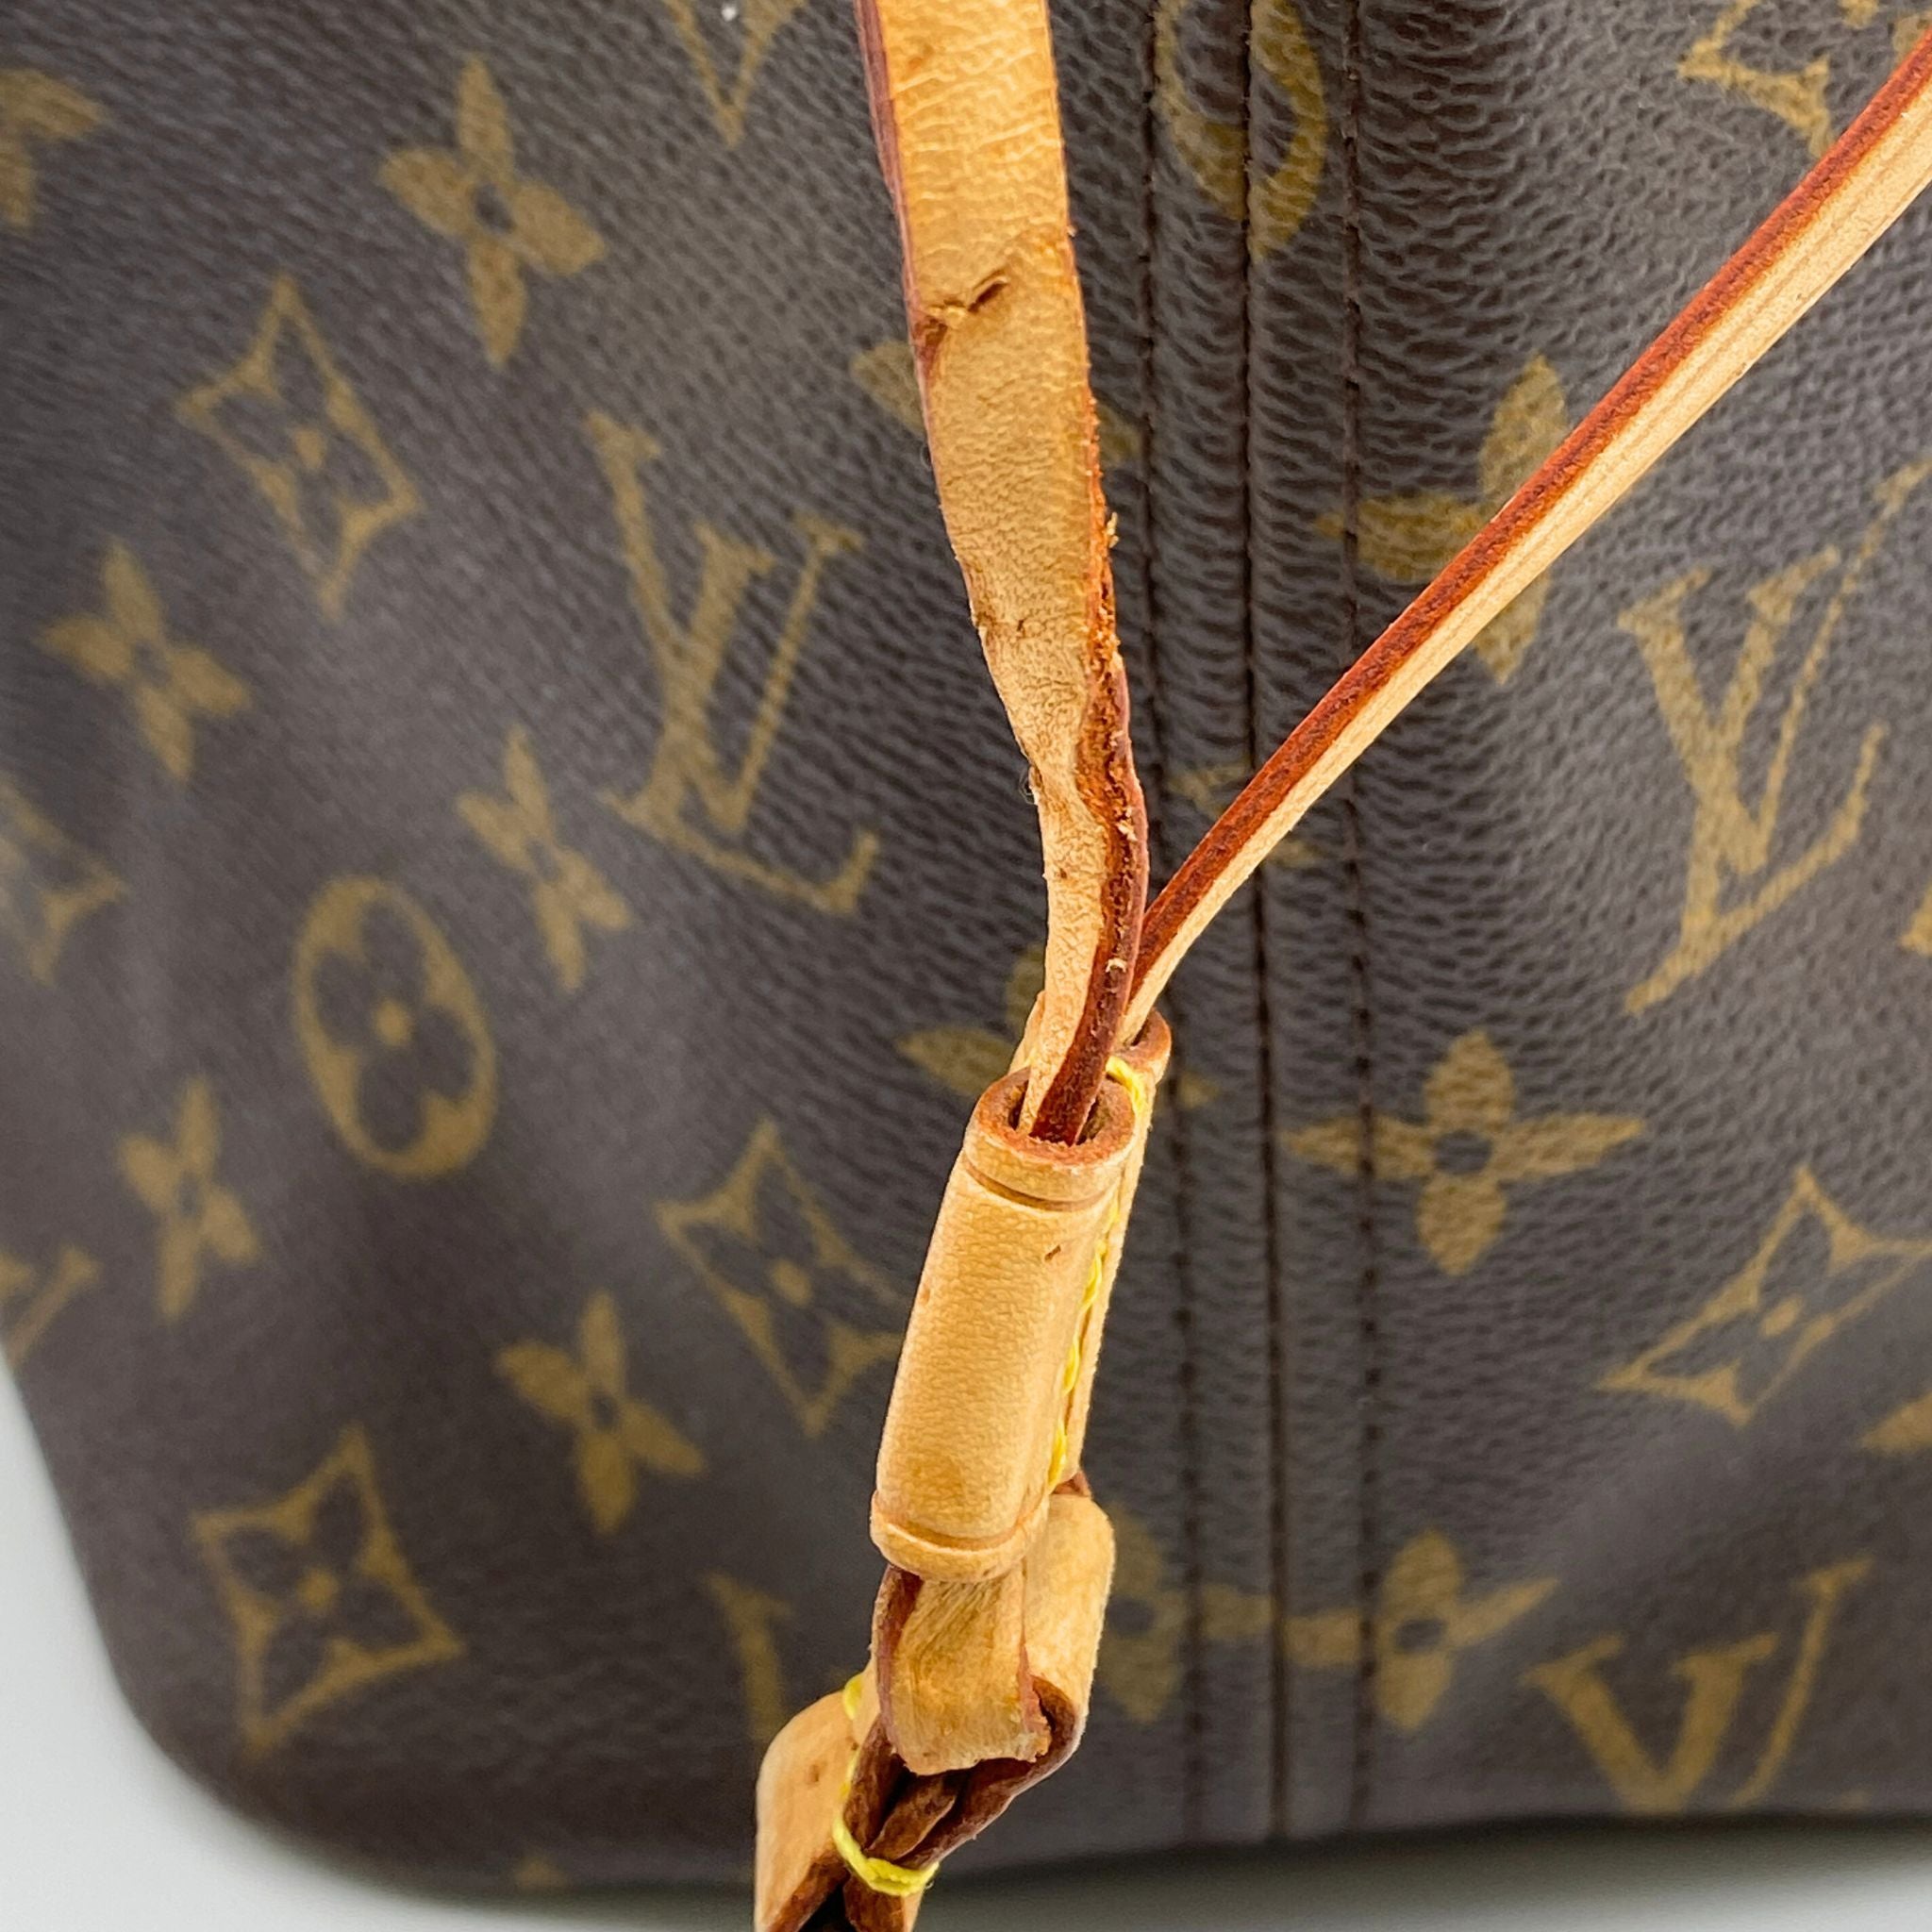 Louis Vuitton Neverfull Tote 368085